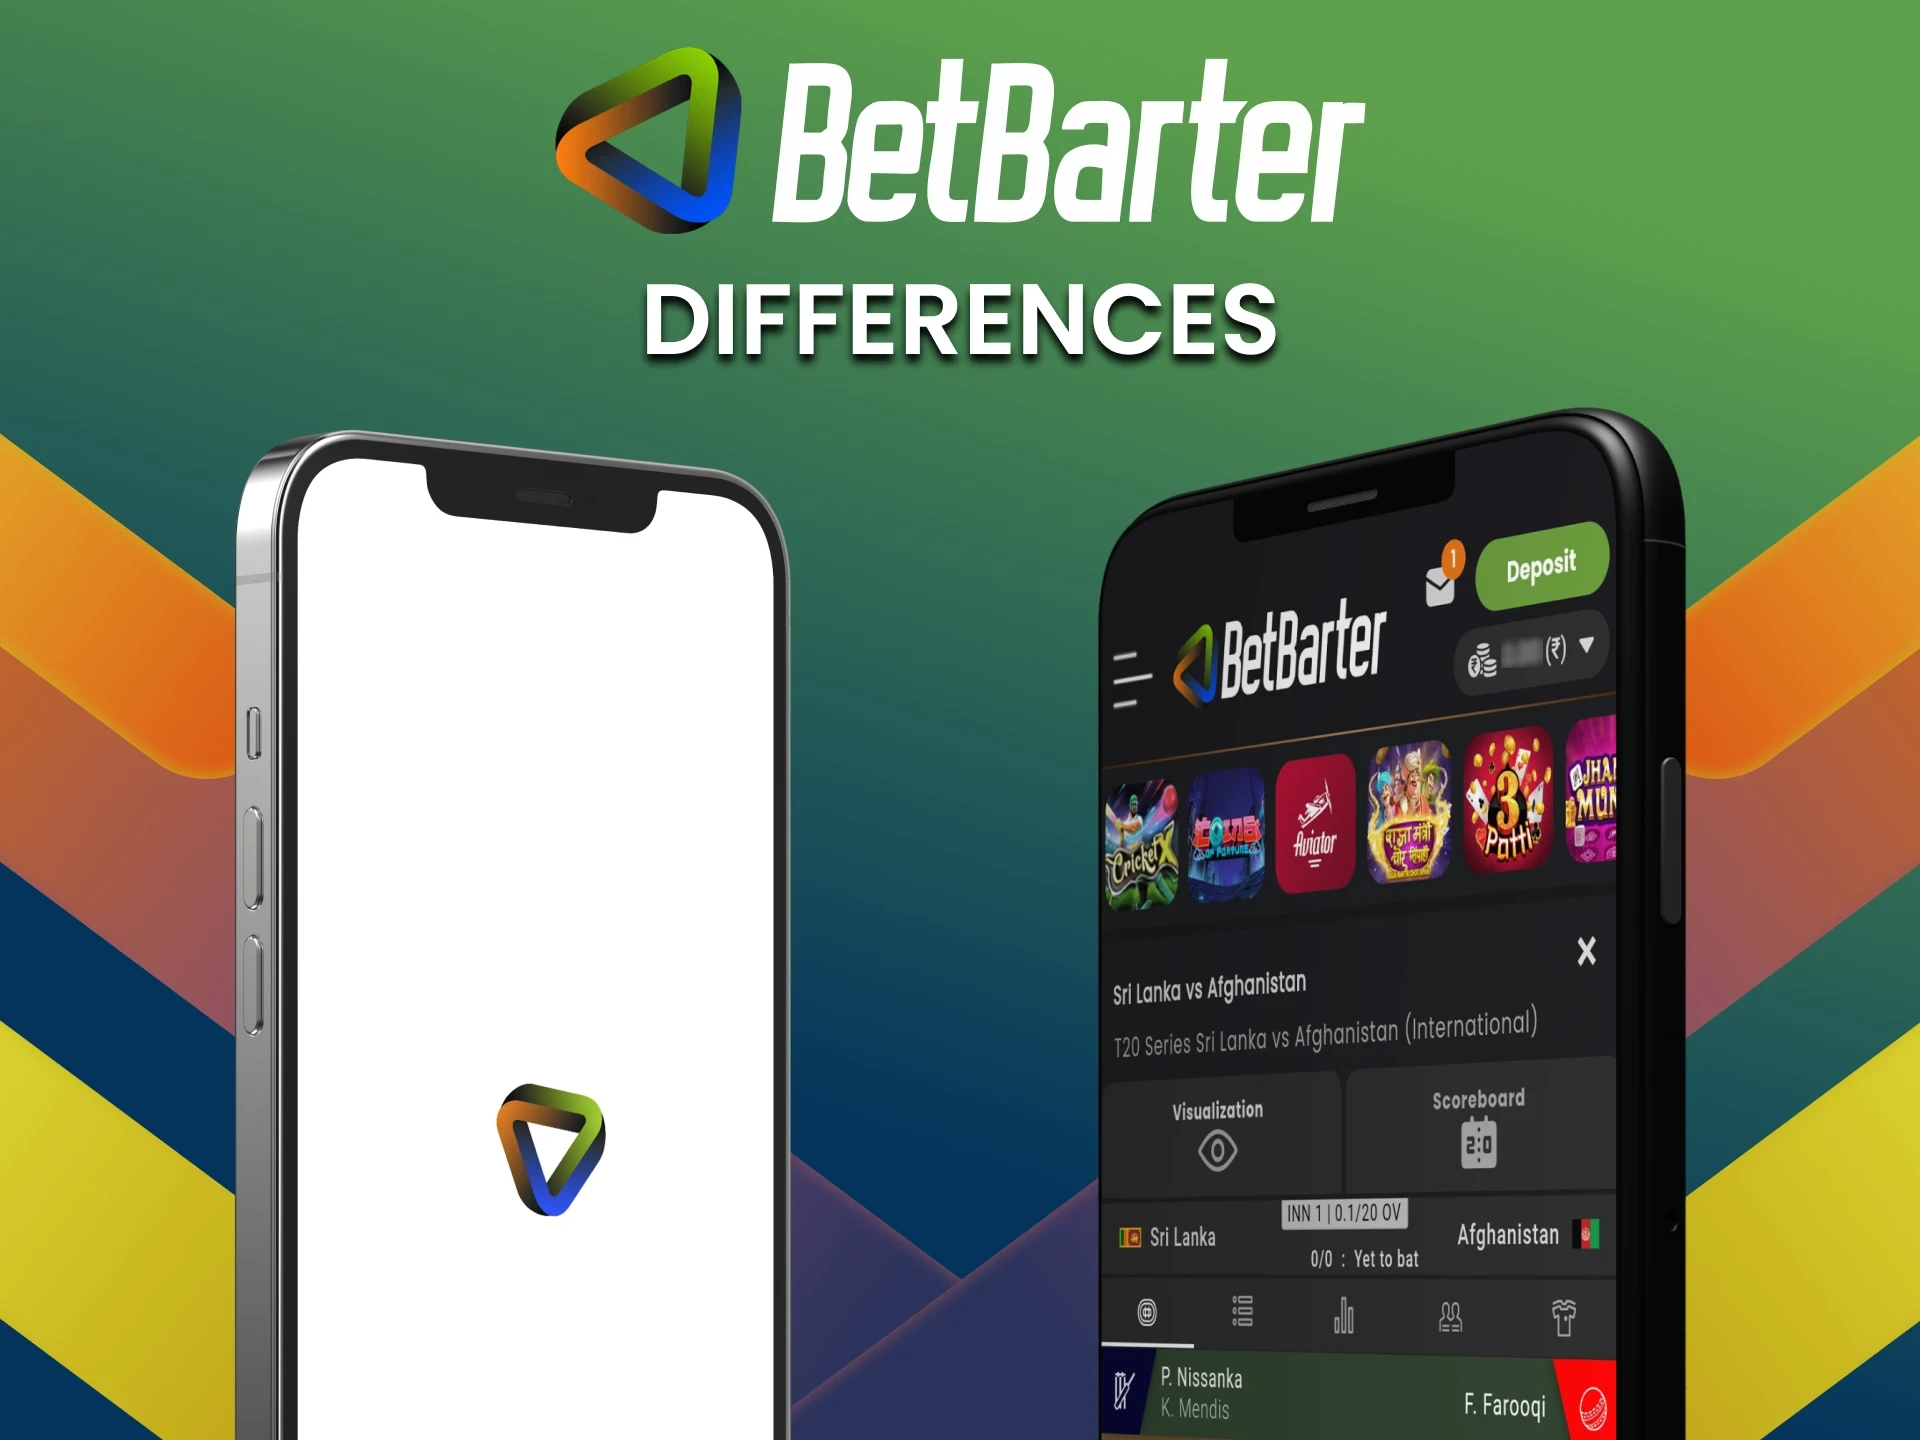 Find out the difference between the mobile site and the BetBarter app.